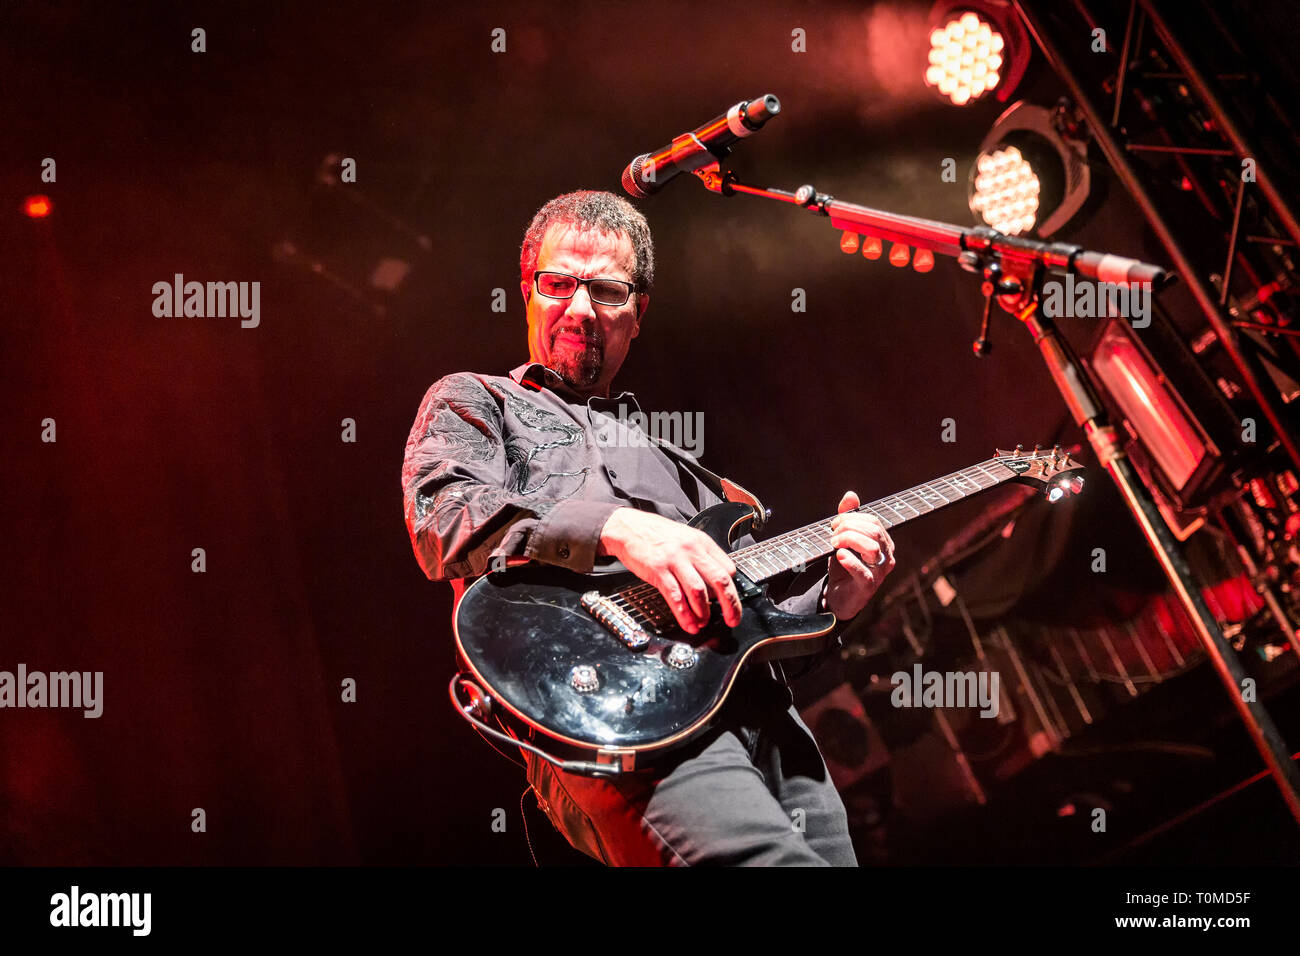 Norway, Oslo - March 17, 2019. The American rock band Godsmack performs a live concert at Oslo Spektrum in Oslo. Here guitarist Tony Rombola is seen live on stage. (Photo credit: Gonzales Photo - Terje Dokken). Stock Photo